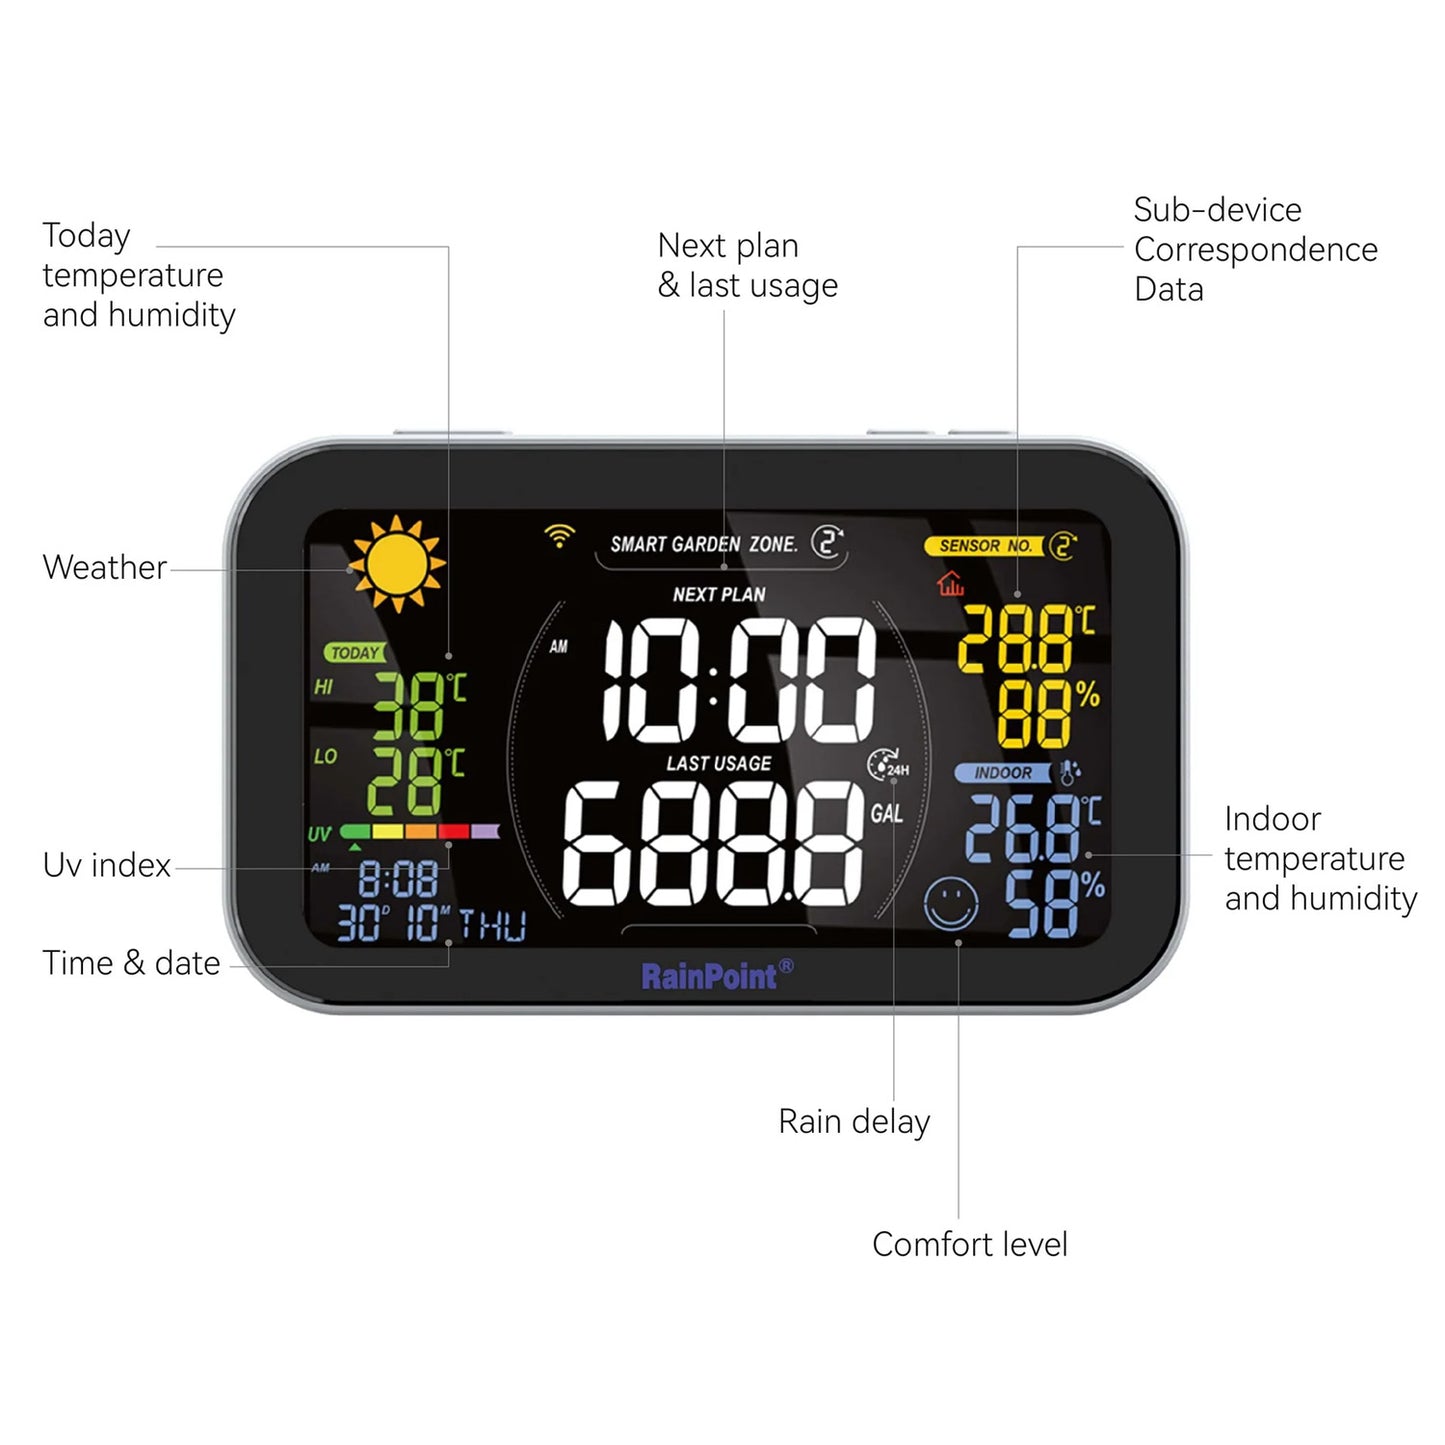 RainPoint Wi-Fi Irrigation Gateway Hub, Compatible with Rain Point Wireless Rain Gauge, Soil Moisture Meter, and other Add-on Sub Devices, Display Weather & Irrigation Data at a Glance